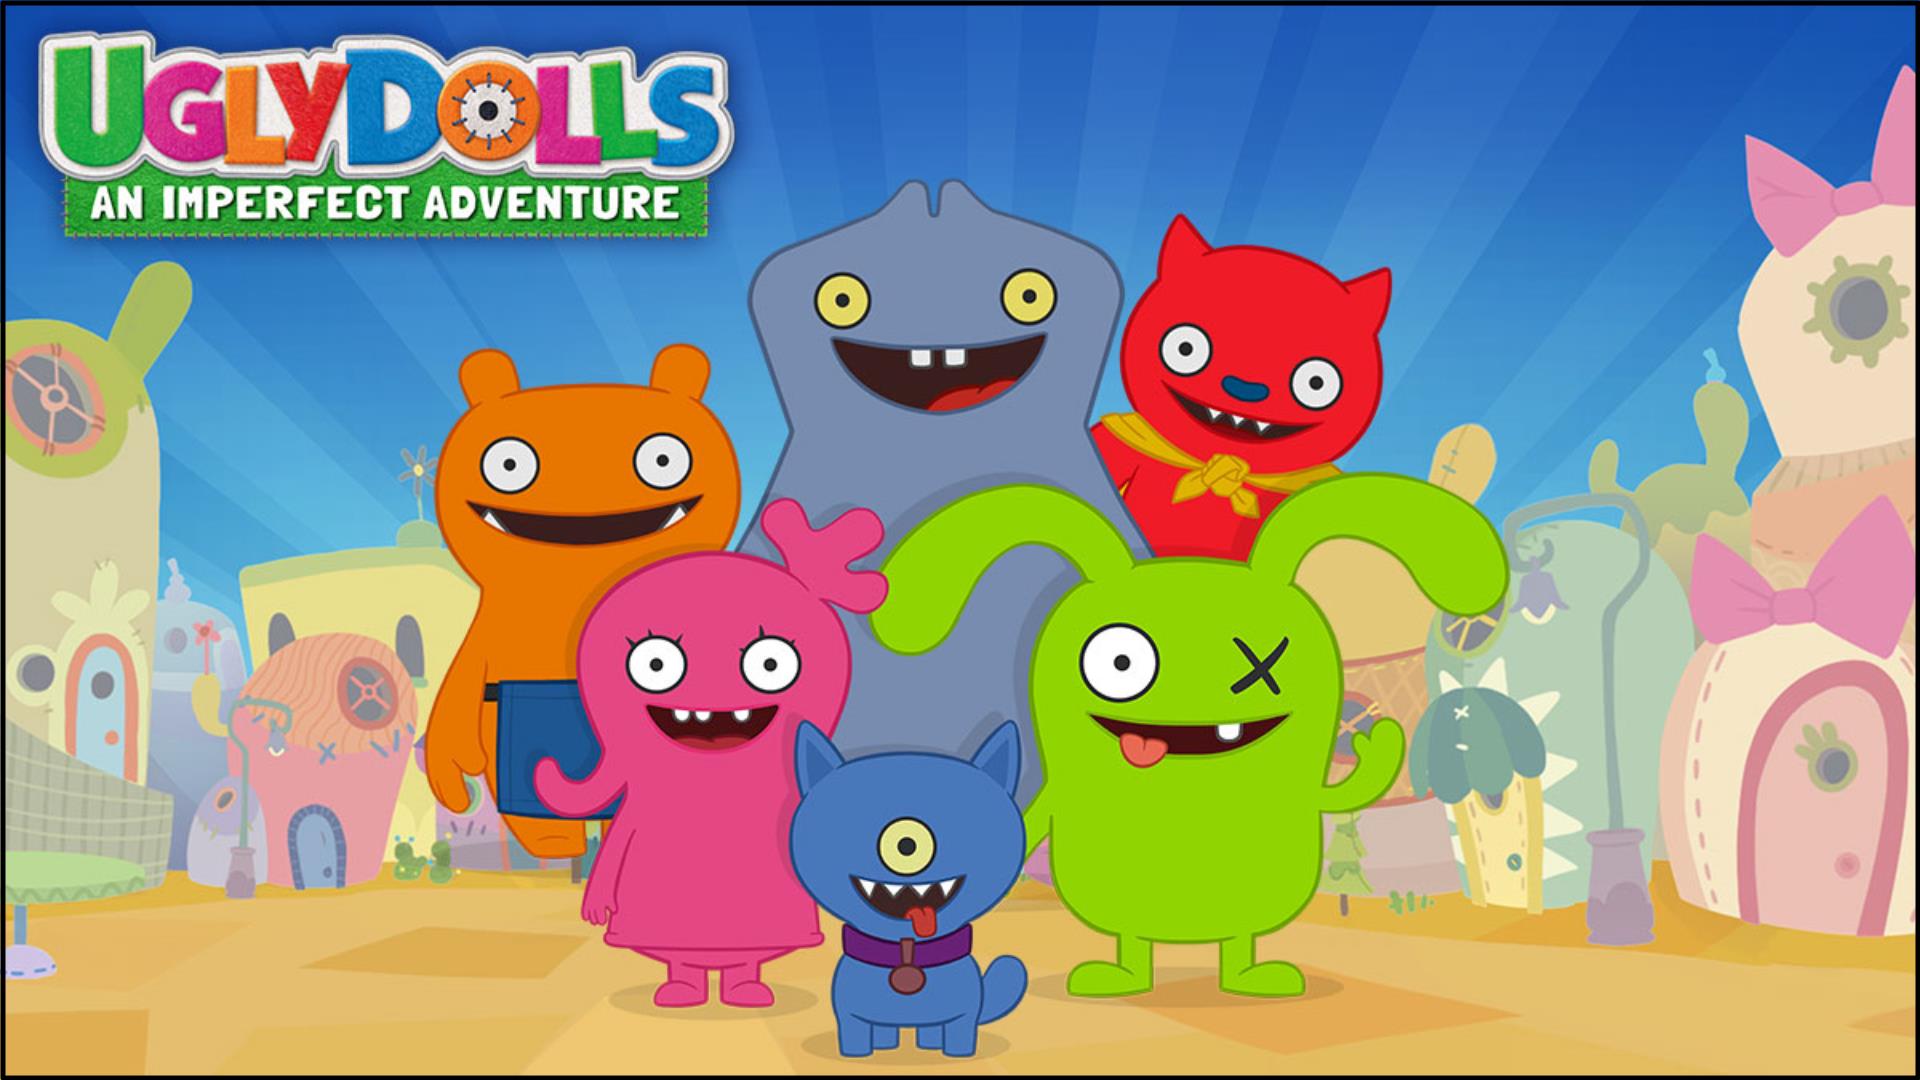 8 Ugly Dolls An Imperfect Adventure